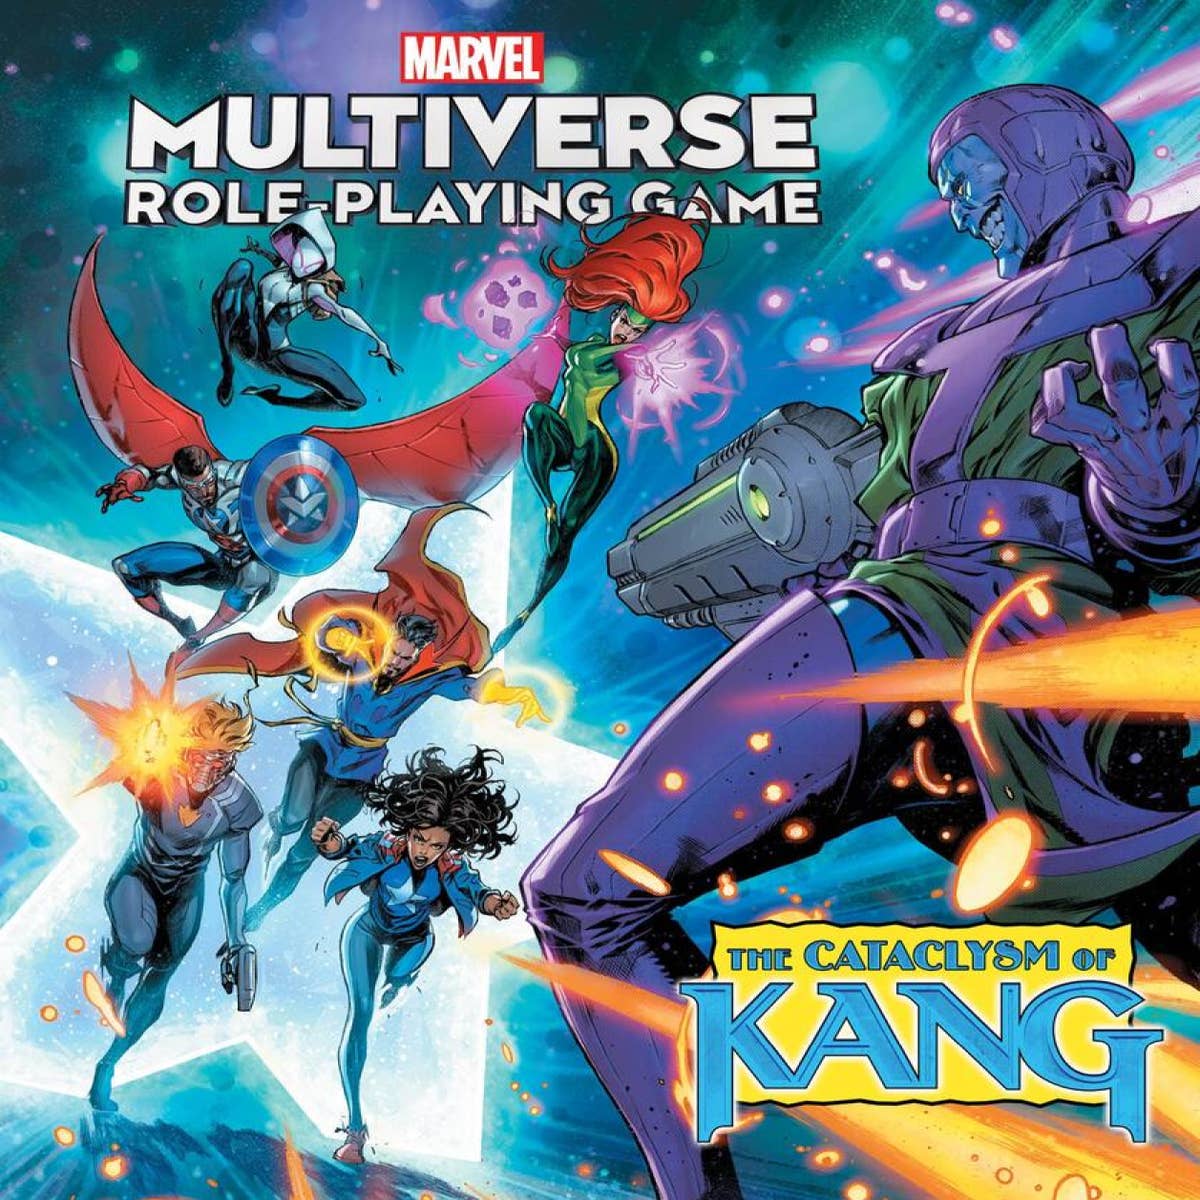 Marvel Multiverse Role-Playing Game Rolls Out New 1.3 Game Update